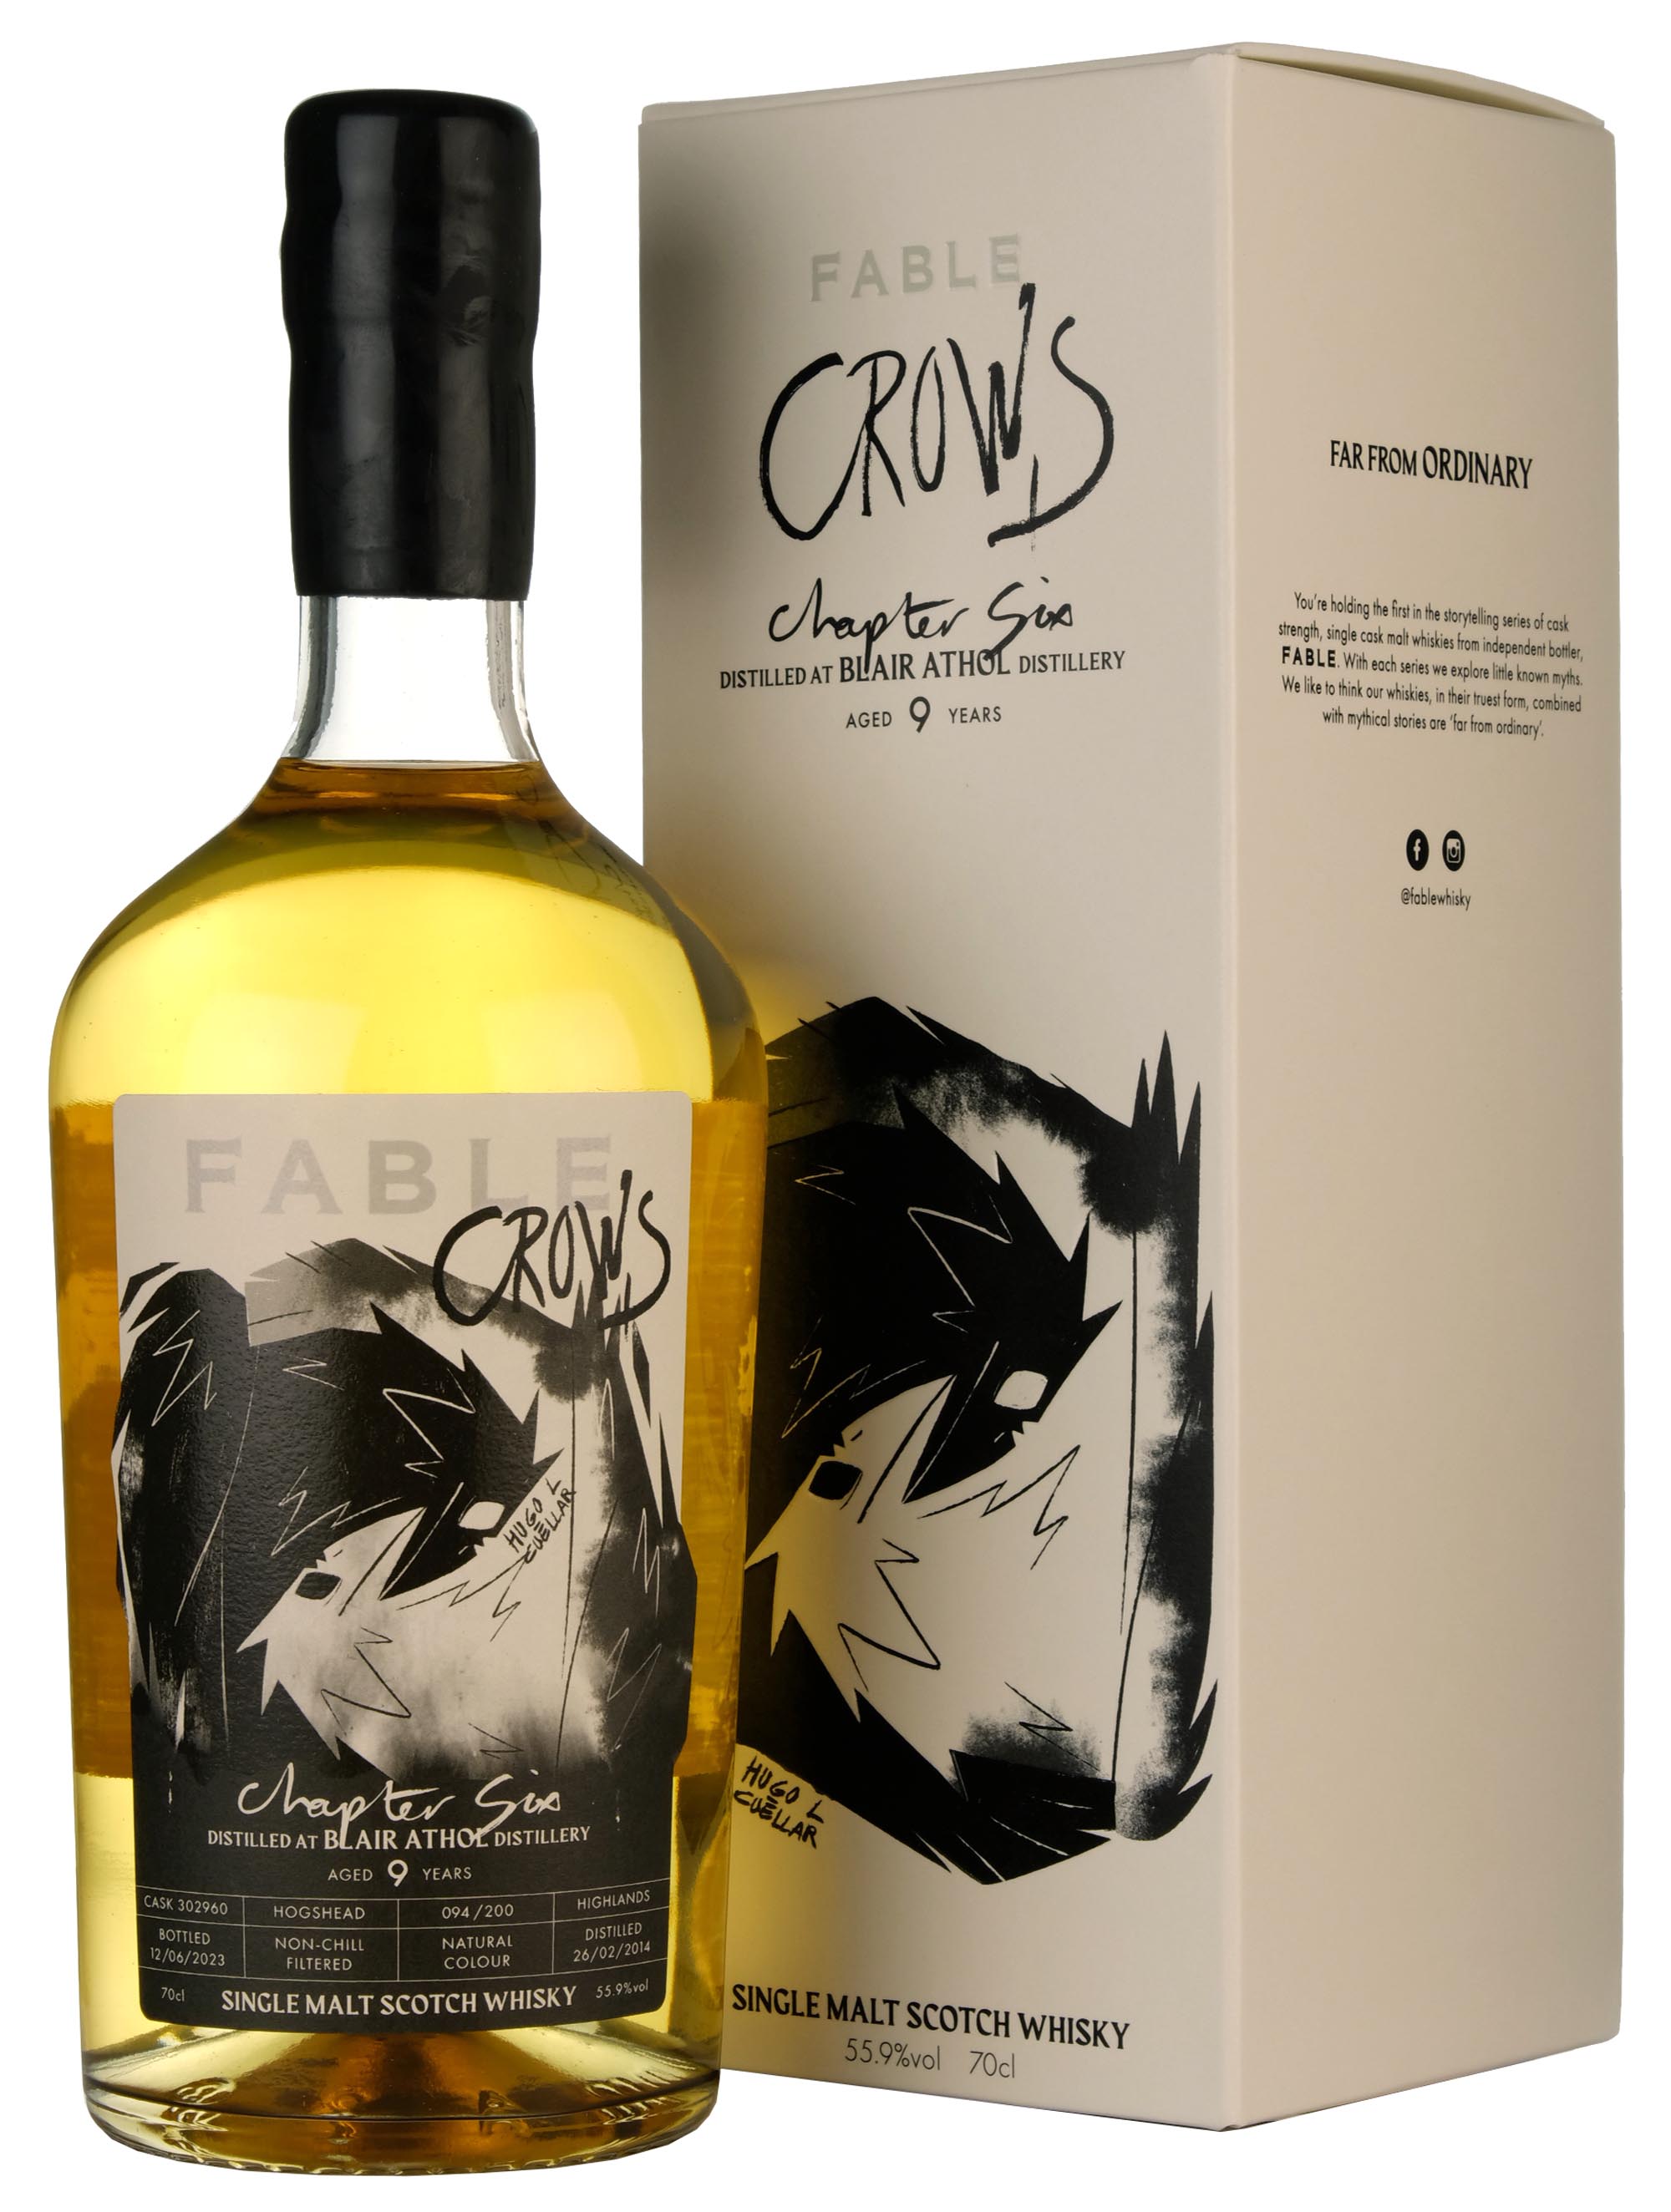 Blair Athol 2014-2023 | 9 Year Old Fable Chapter Six Crows Single Cask 302960